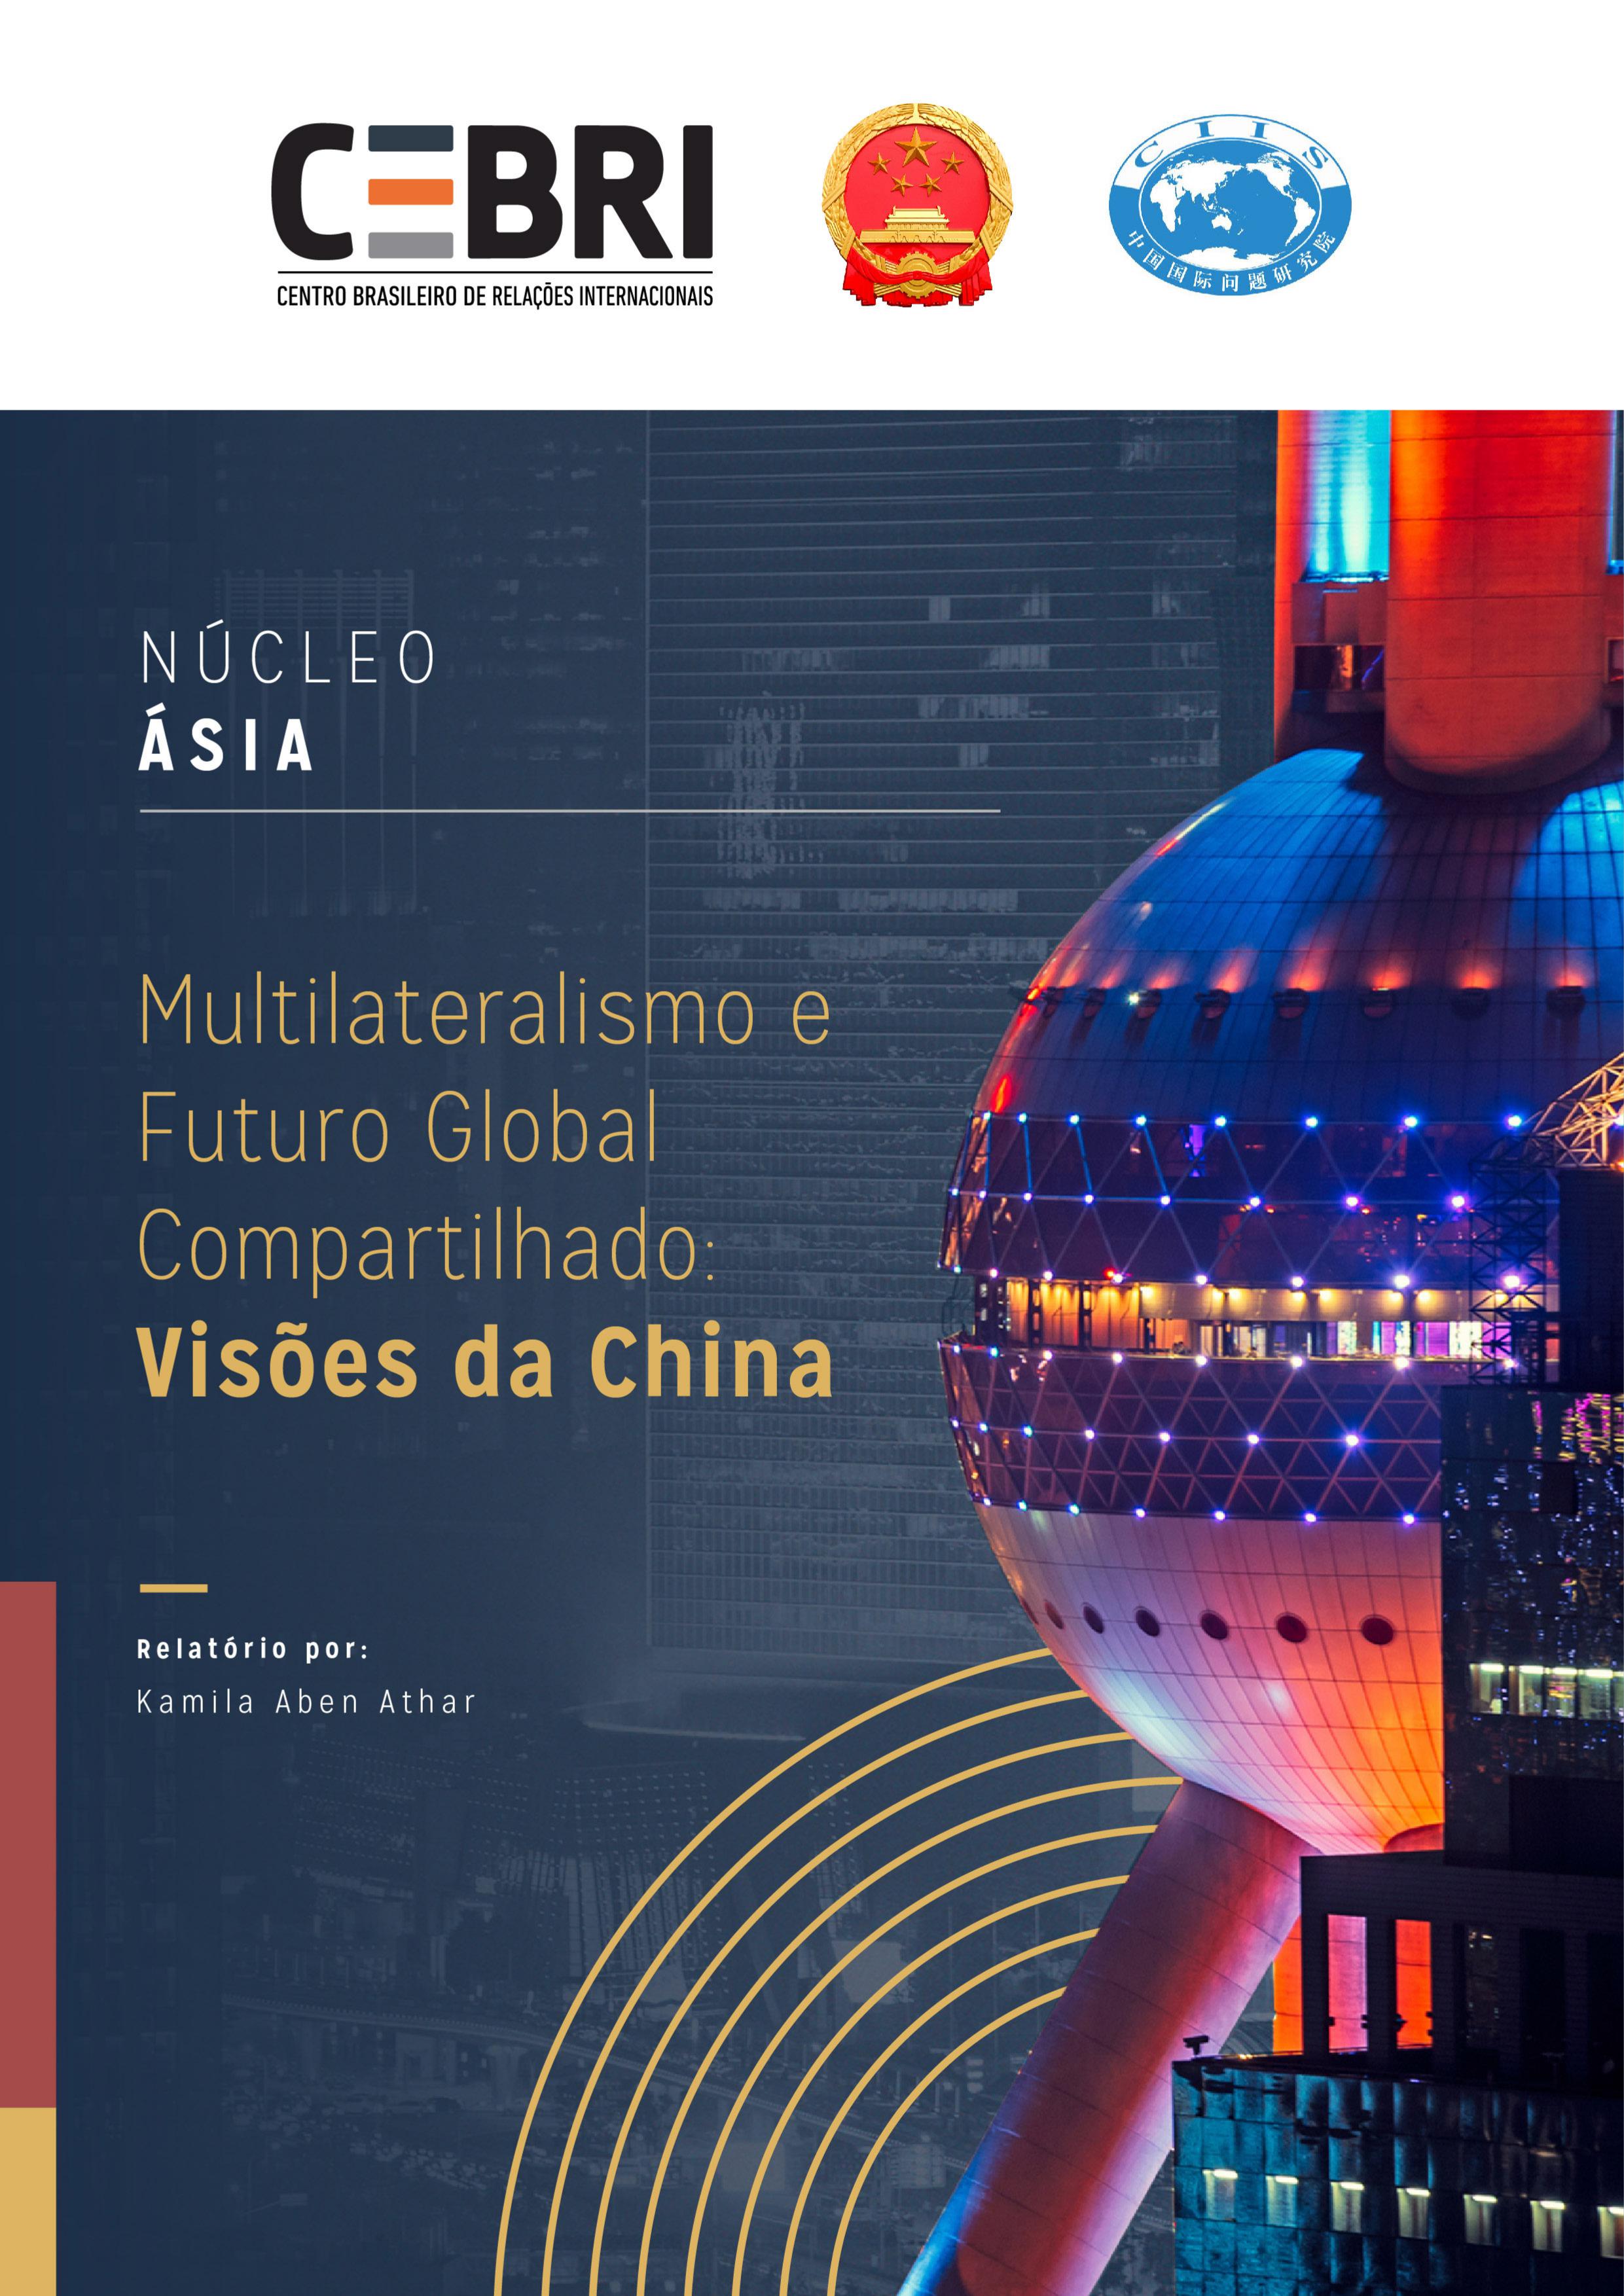 CEBRI-Journal  Hedging Between the U.S. and China: Brazil